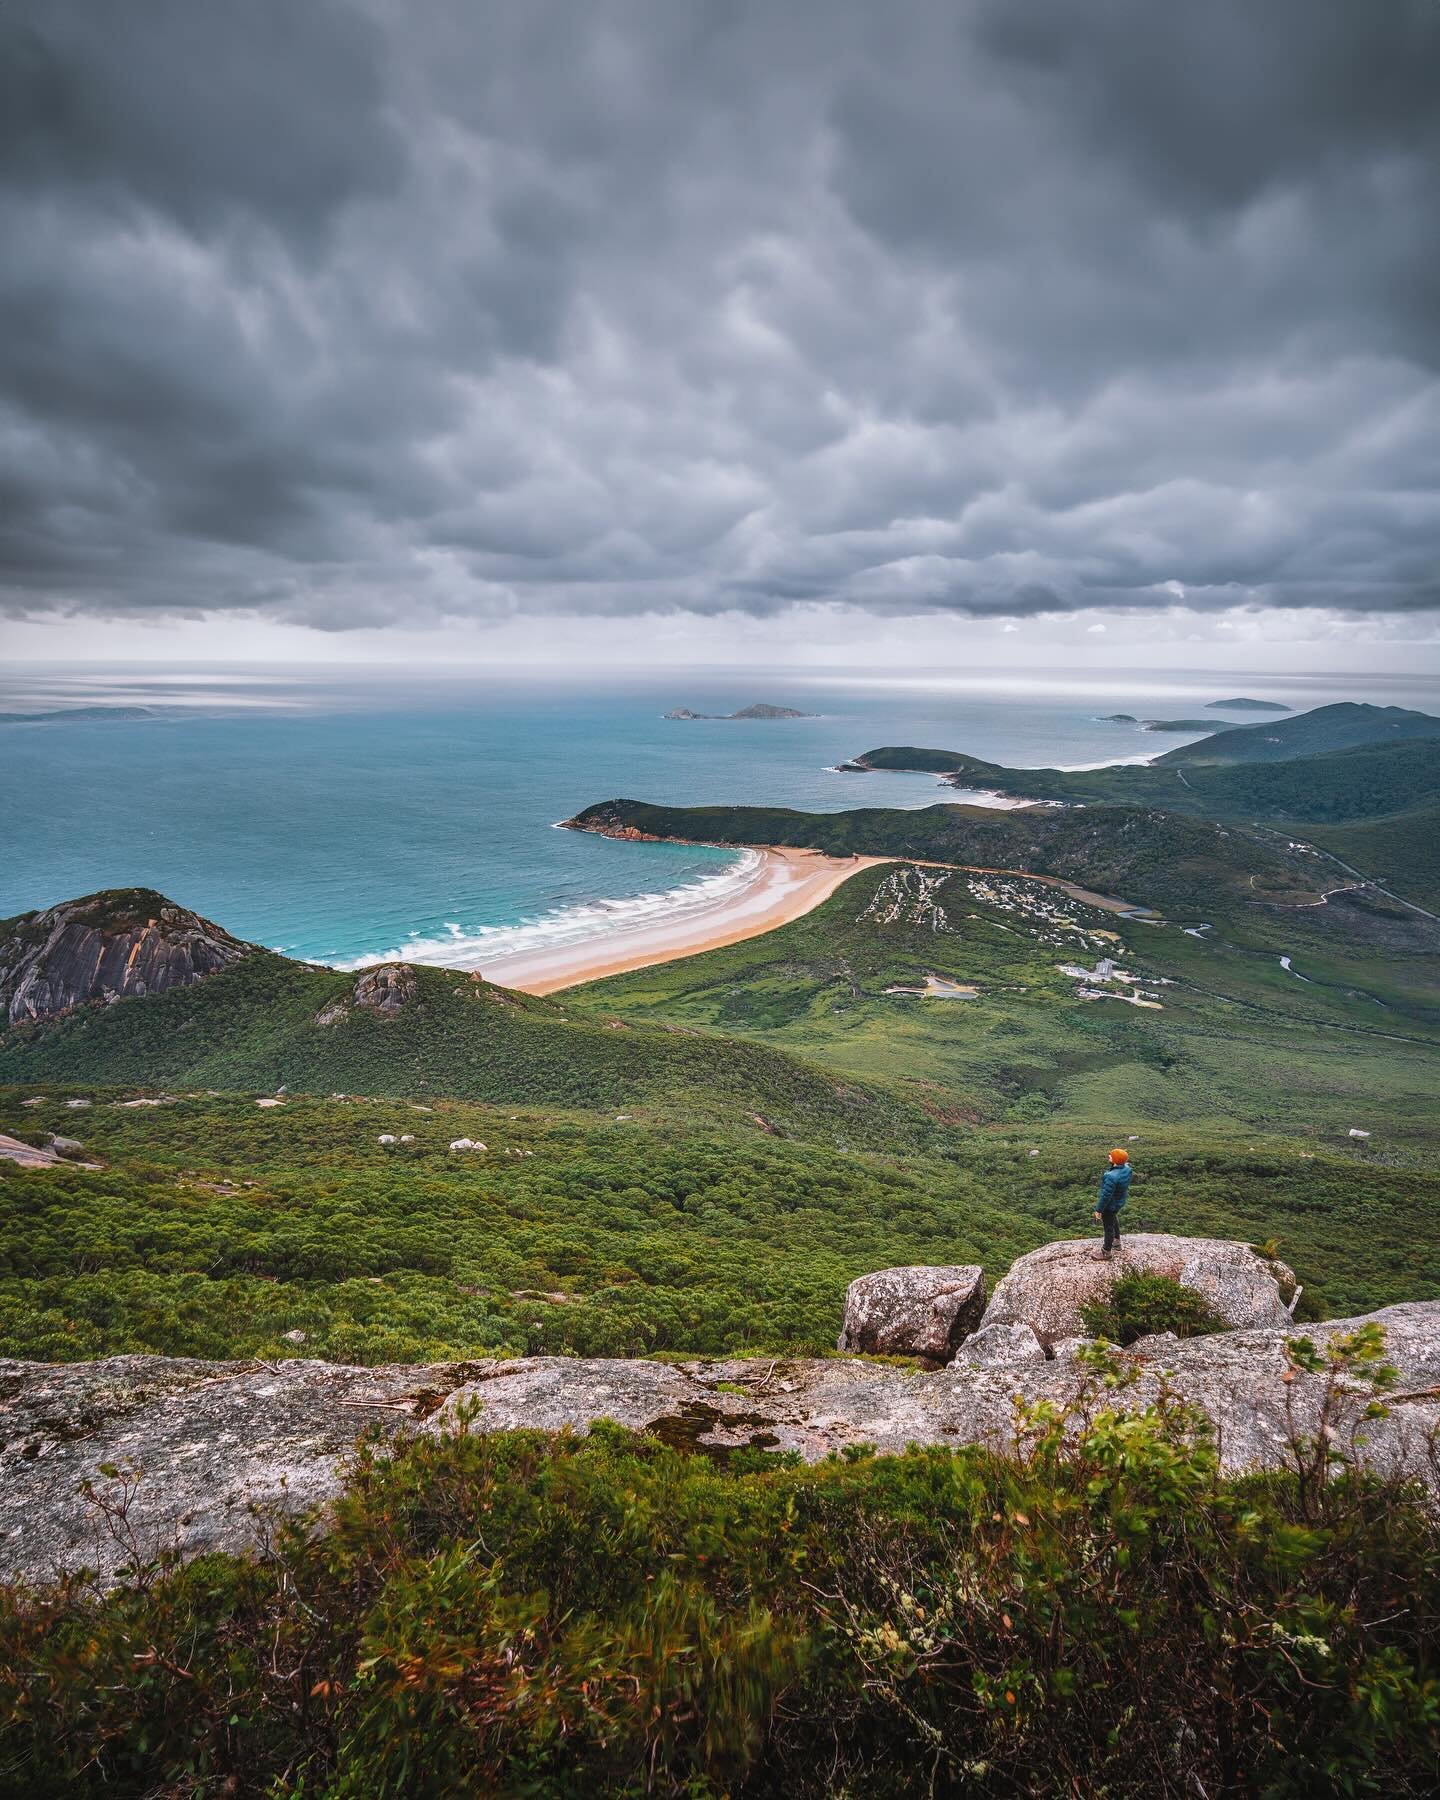 On top of Mount Oberon in Wilsons Prom. Located in the very bottom of Australia, this 558m mountain summit is an easy walk to get some incredible views of the beautiful coastline below. Easily the best view in the area!

#wilsonsprom #wilsonspromonto